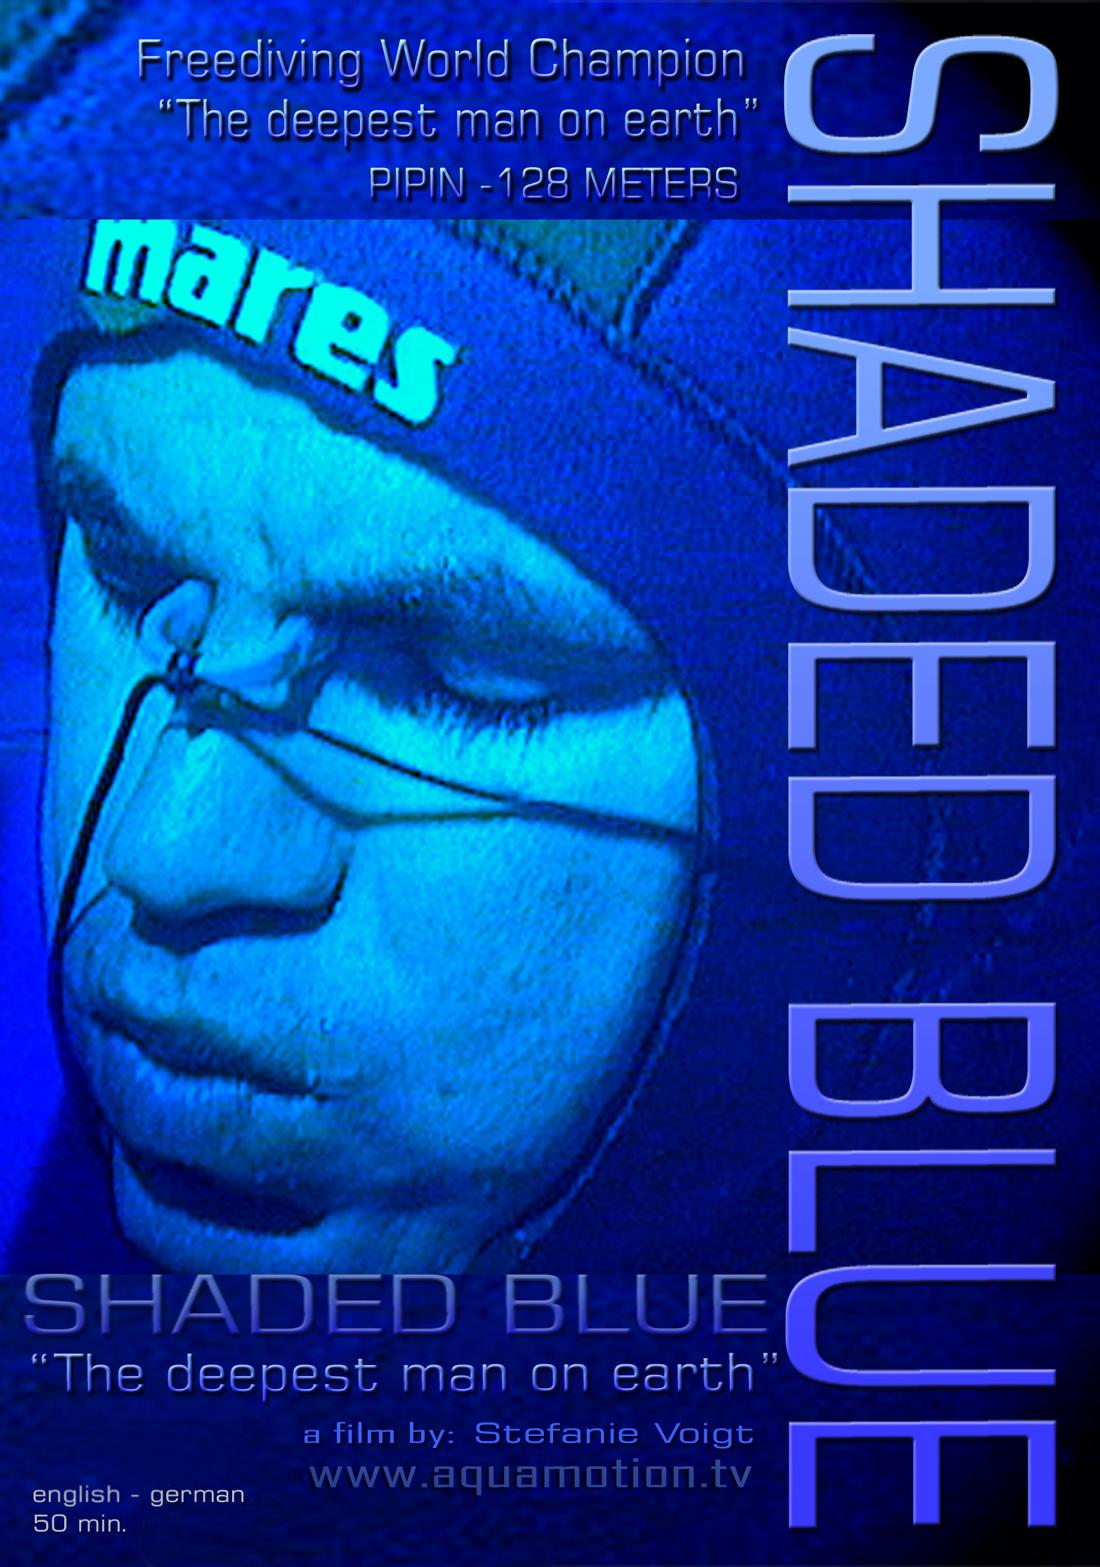 SHADED BLUE - Pipin, the deepest man on earth - a film by aquamotion -  CLICK PICTURE TO VIEW VIDEO